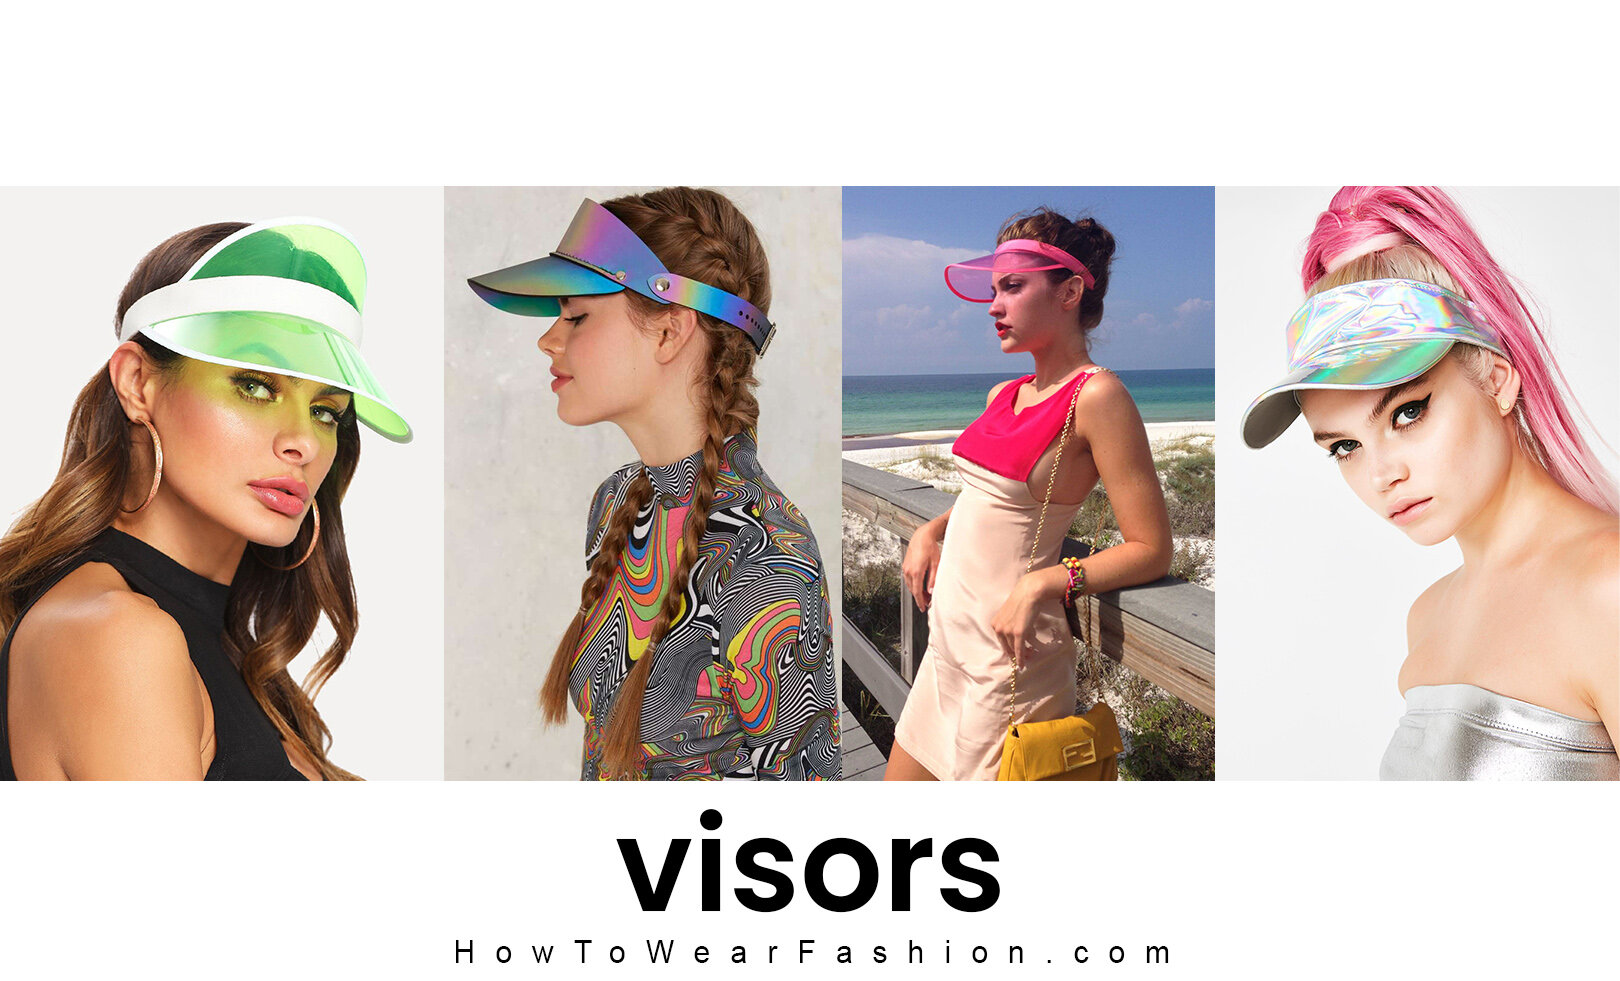 https://images.squarespace-cdn.com/content/v1/57a37eb520099e5233bca0e2/1595886547792-HR0OTUWPVGCRS98LQQMW/how-to-wear-visor-hats-style-fashion-trends-accessories-spring-summer-fall-winter.jpg